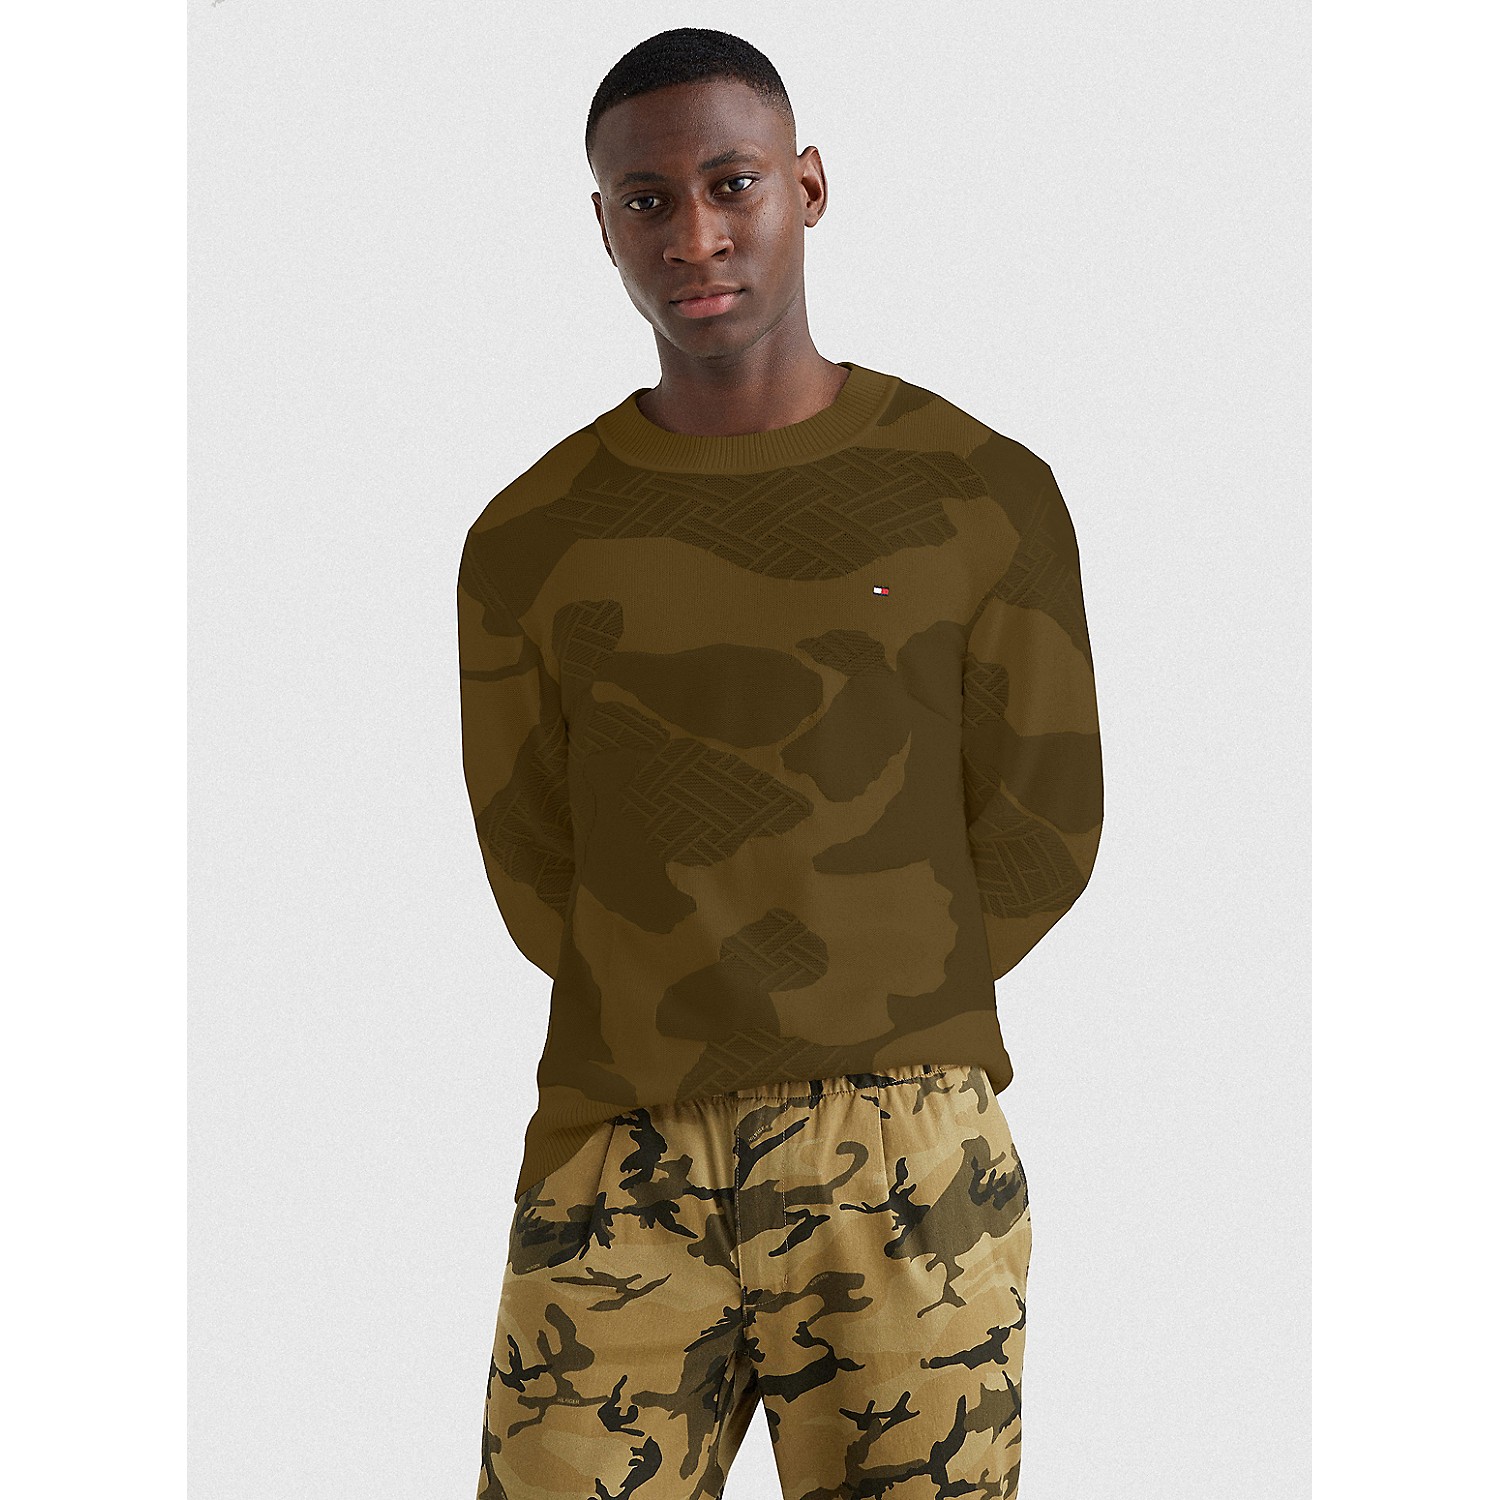 TOMMY HILFIGER Camo Sweater